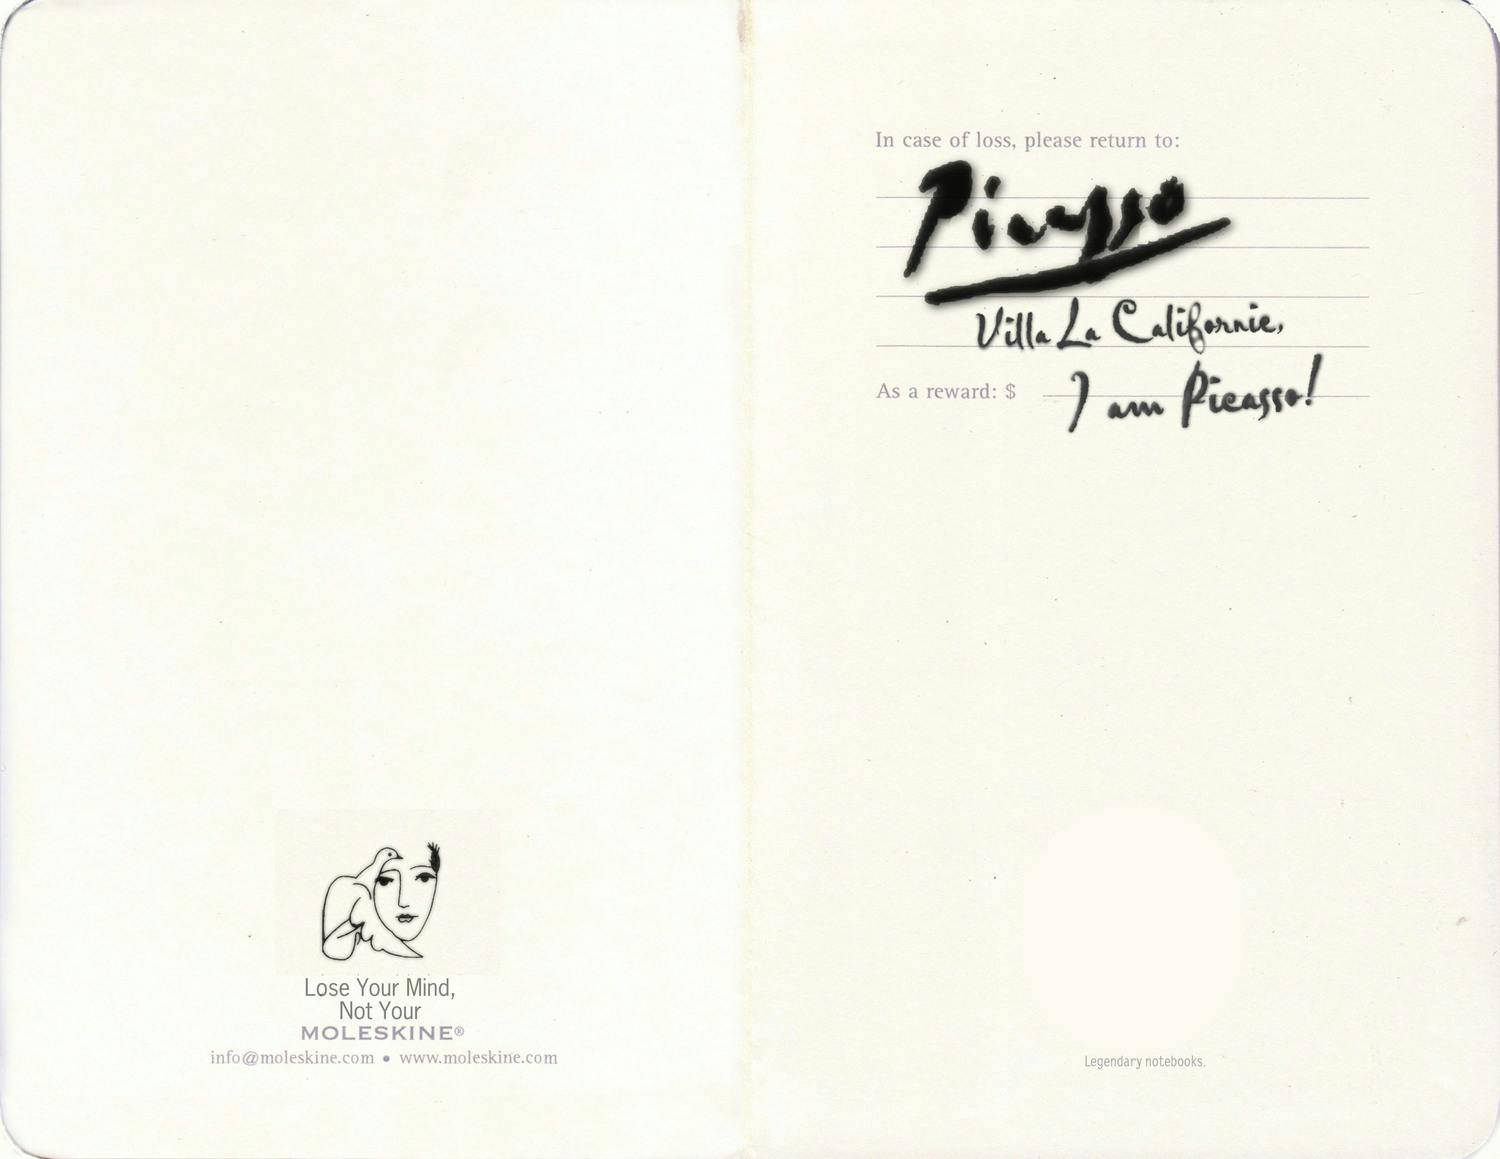 A moleskin notebook with Picasso's signature